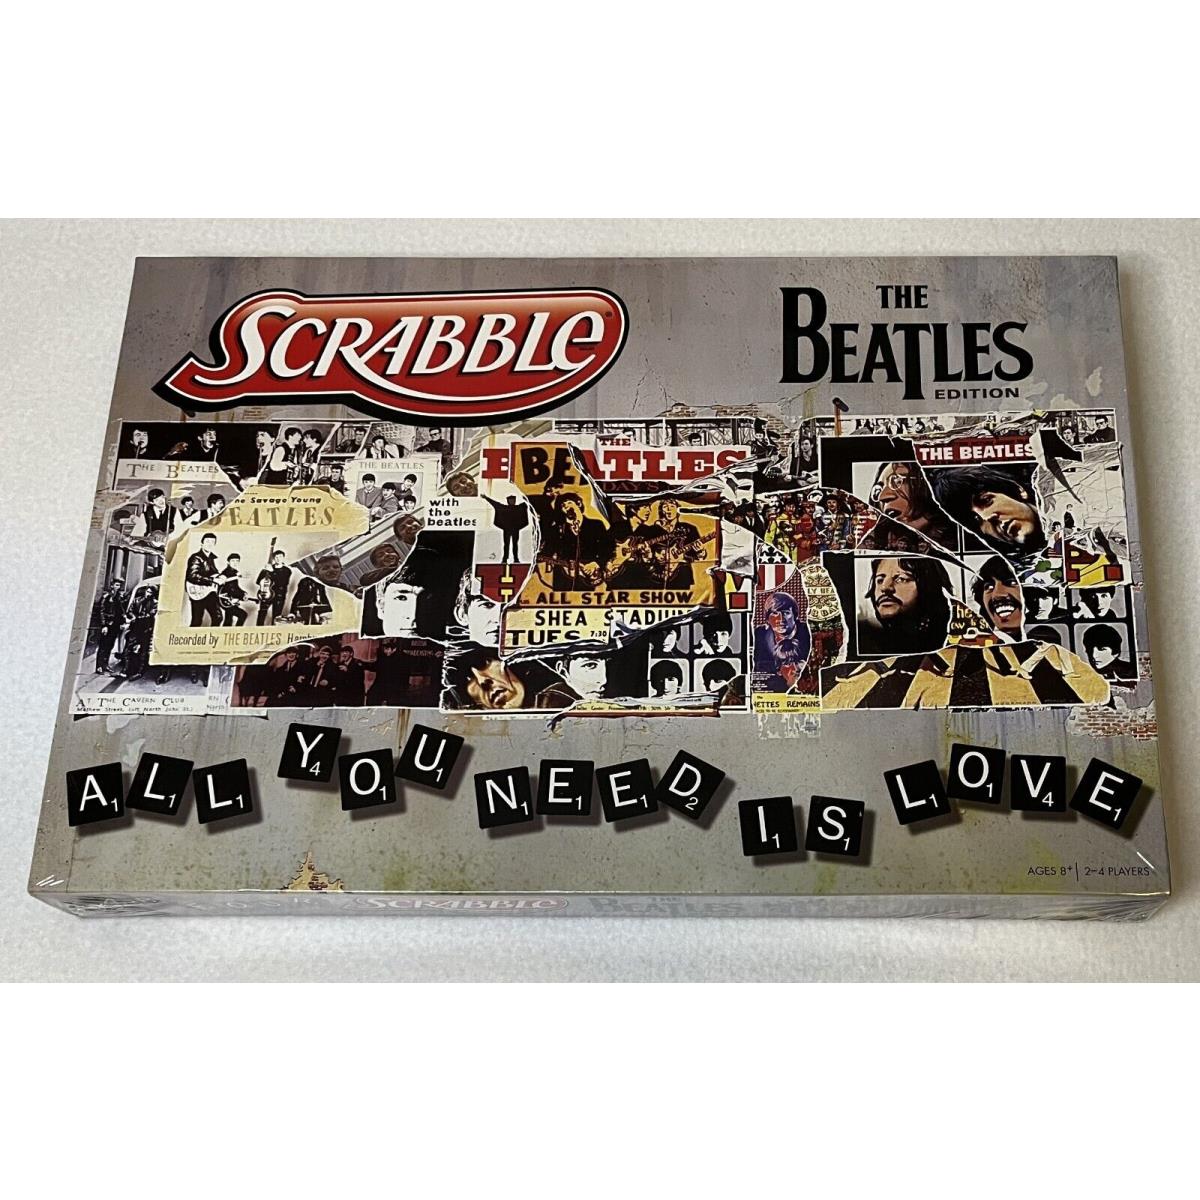 Hasbro Scrabble Beatles Edition Board Game - All You Need IS Love